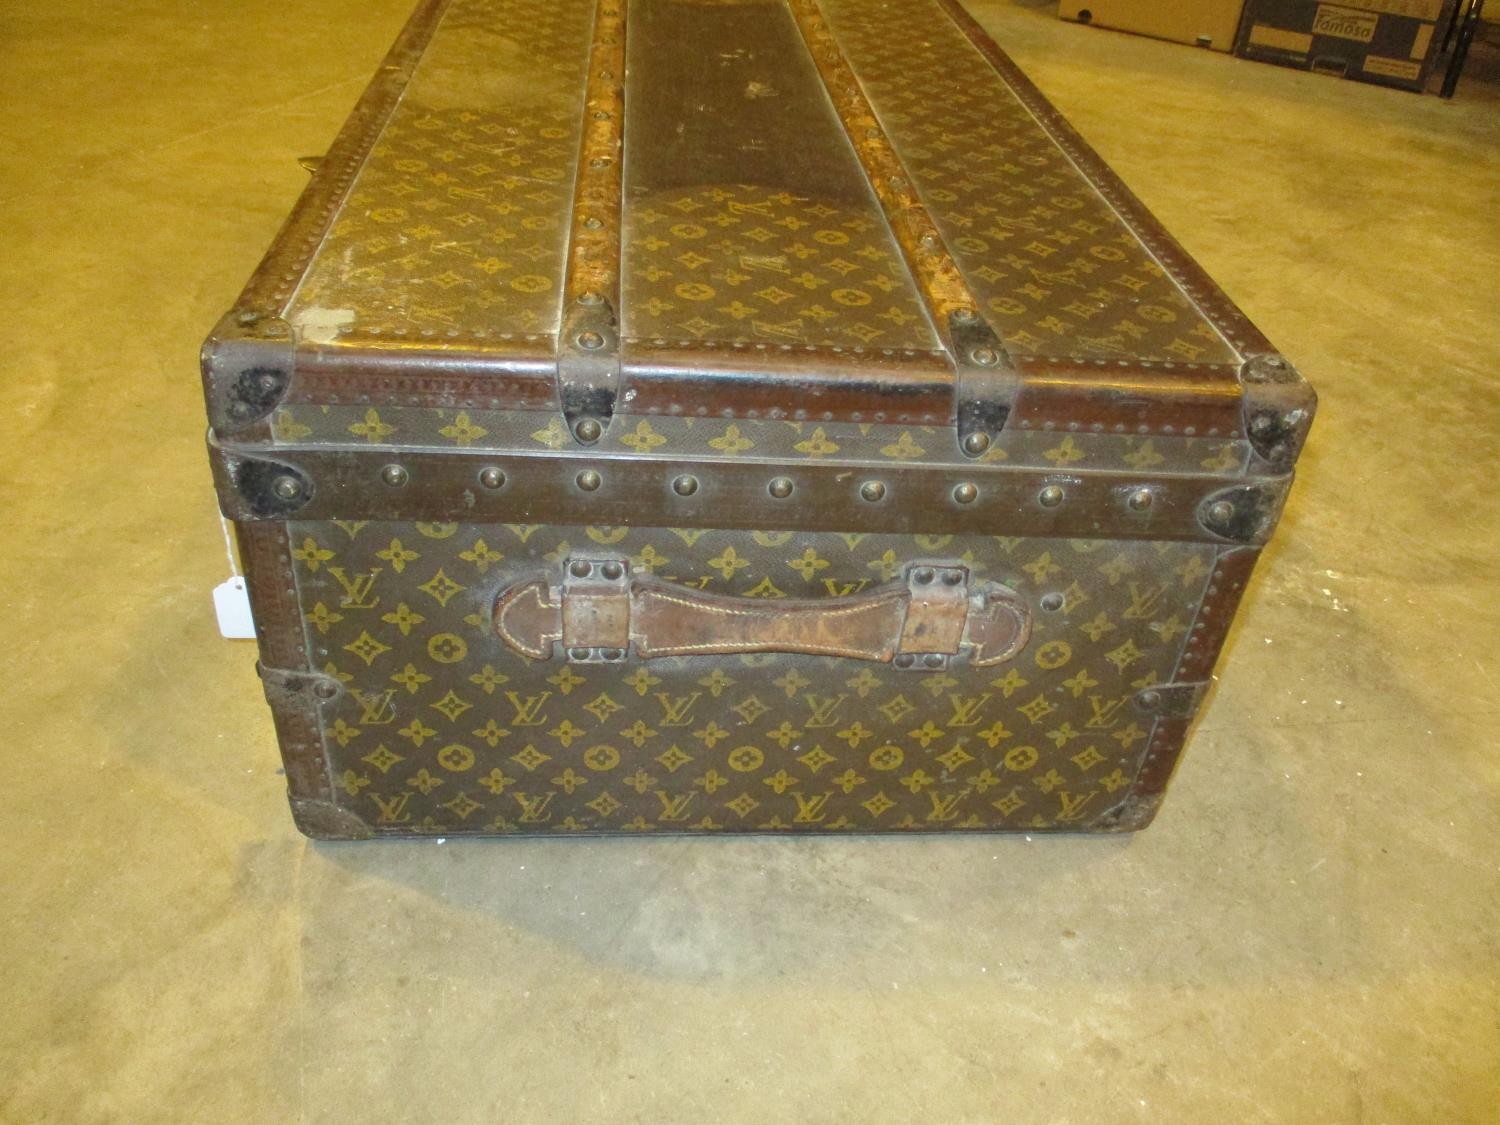 Louis Vuitton Cabin Trunk, Early 20th Century, covered in monogram canvas with Louis Vuitton label - Image 4 of 11